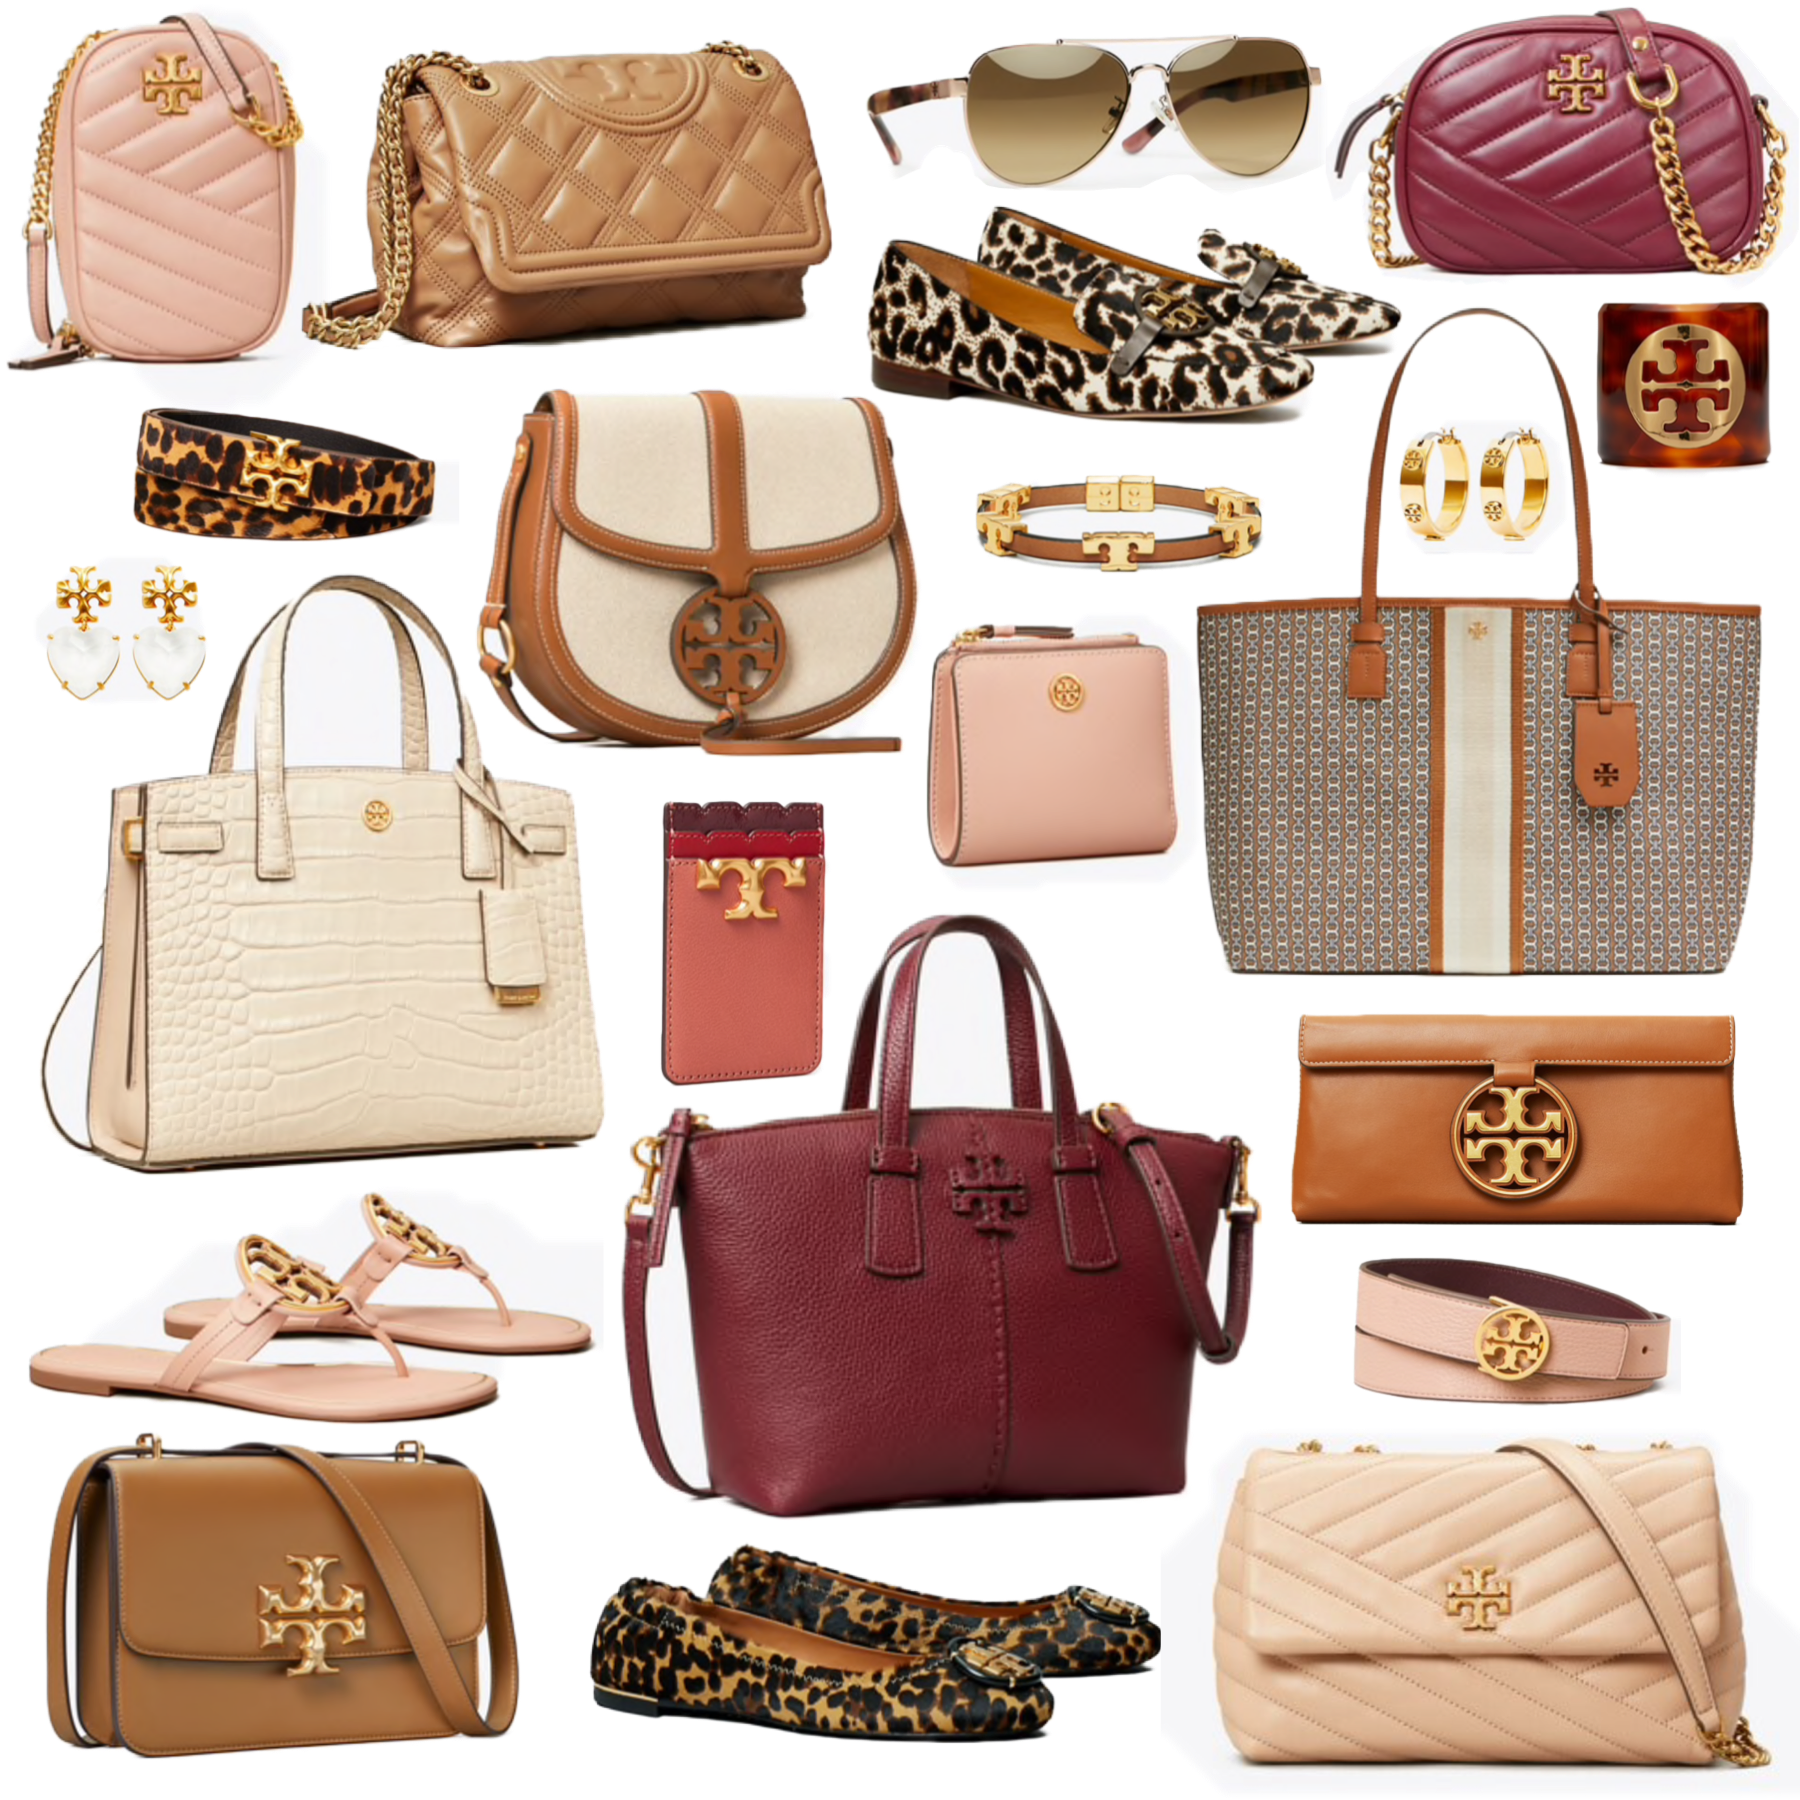 Tory Burch Fall Event 2020 | Save Up To 30% Off + Free Shipping! - The  Double Take Girls